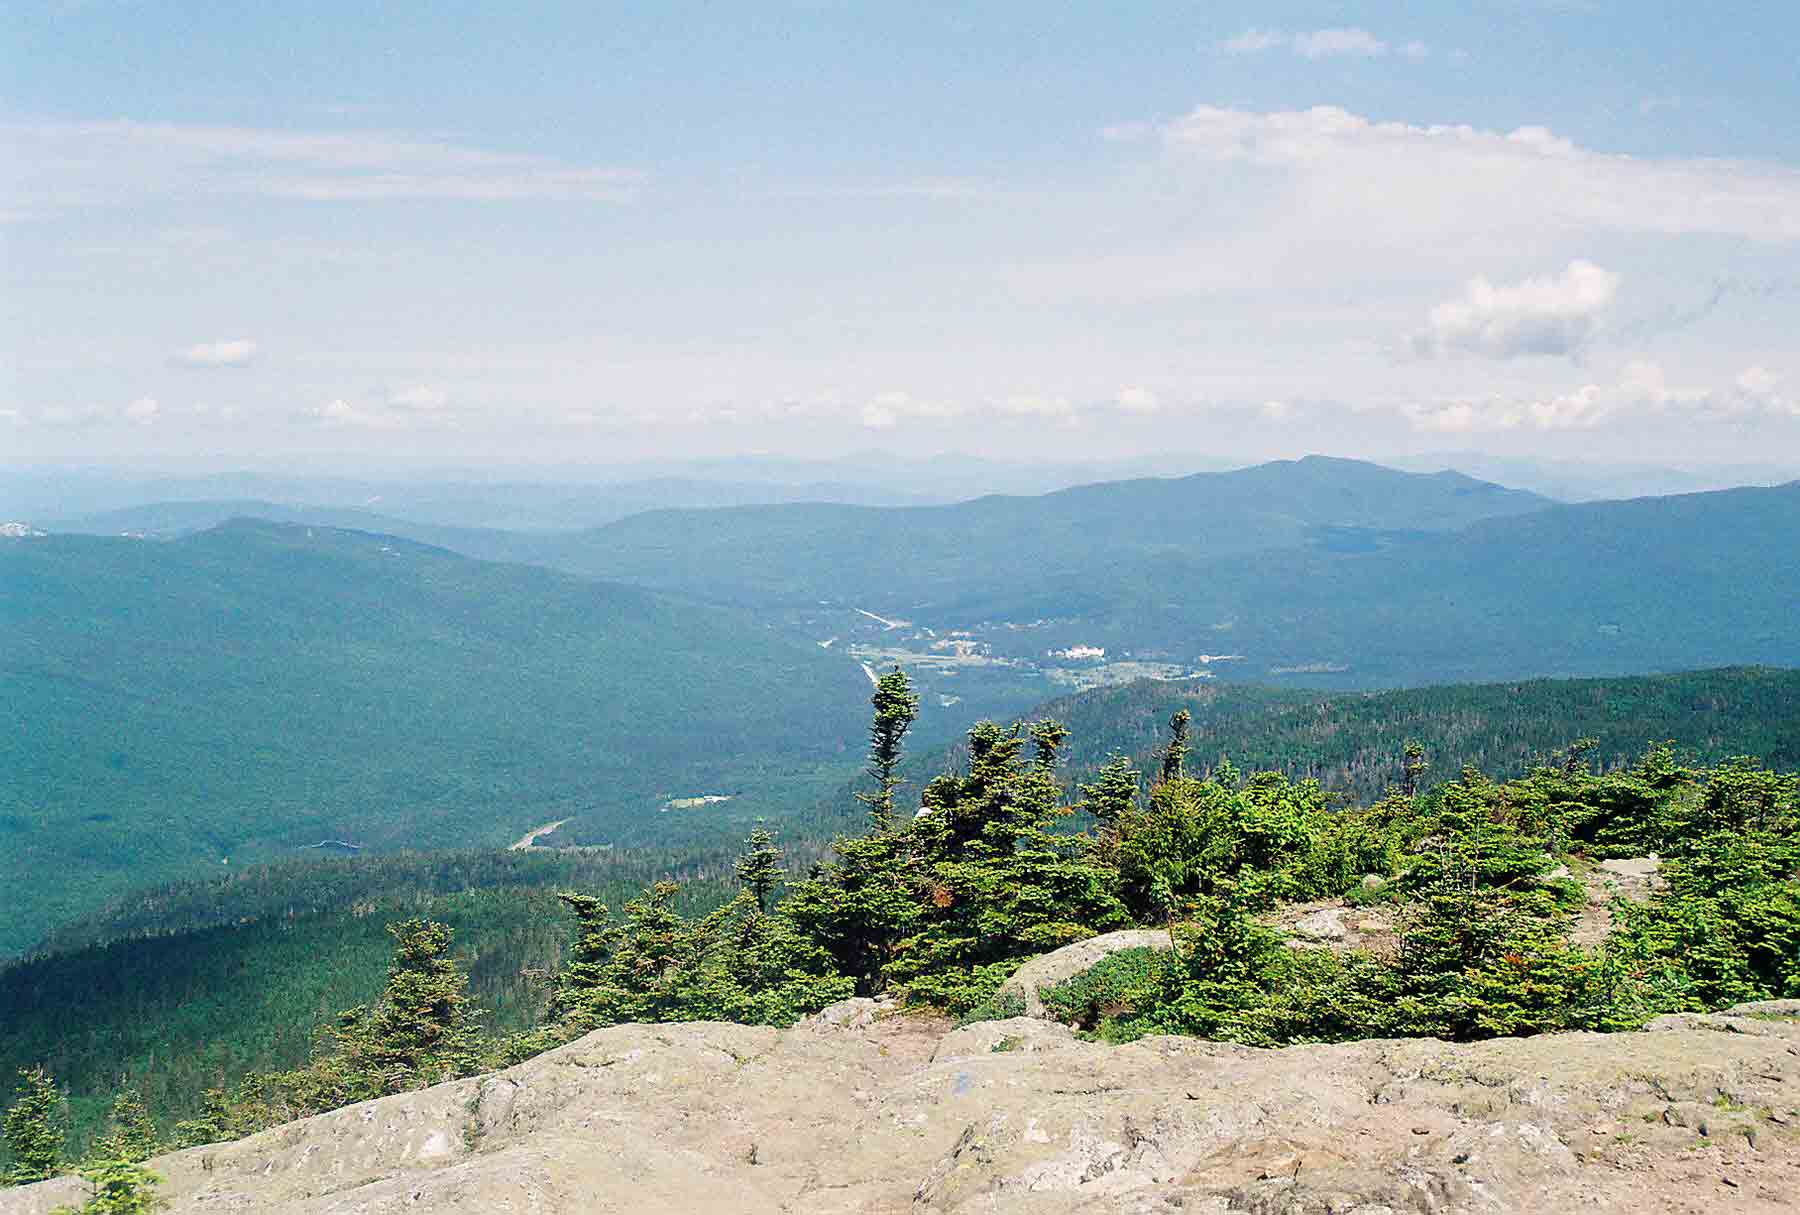 Looking northwest from  the summit of Mt. Jackson. The large white building in the valley is the Mt. Washington Hotel. Courtesy dlcul@conncoll.edu